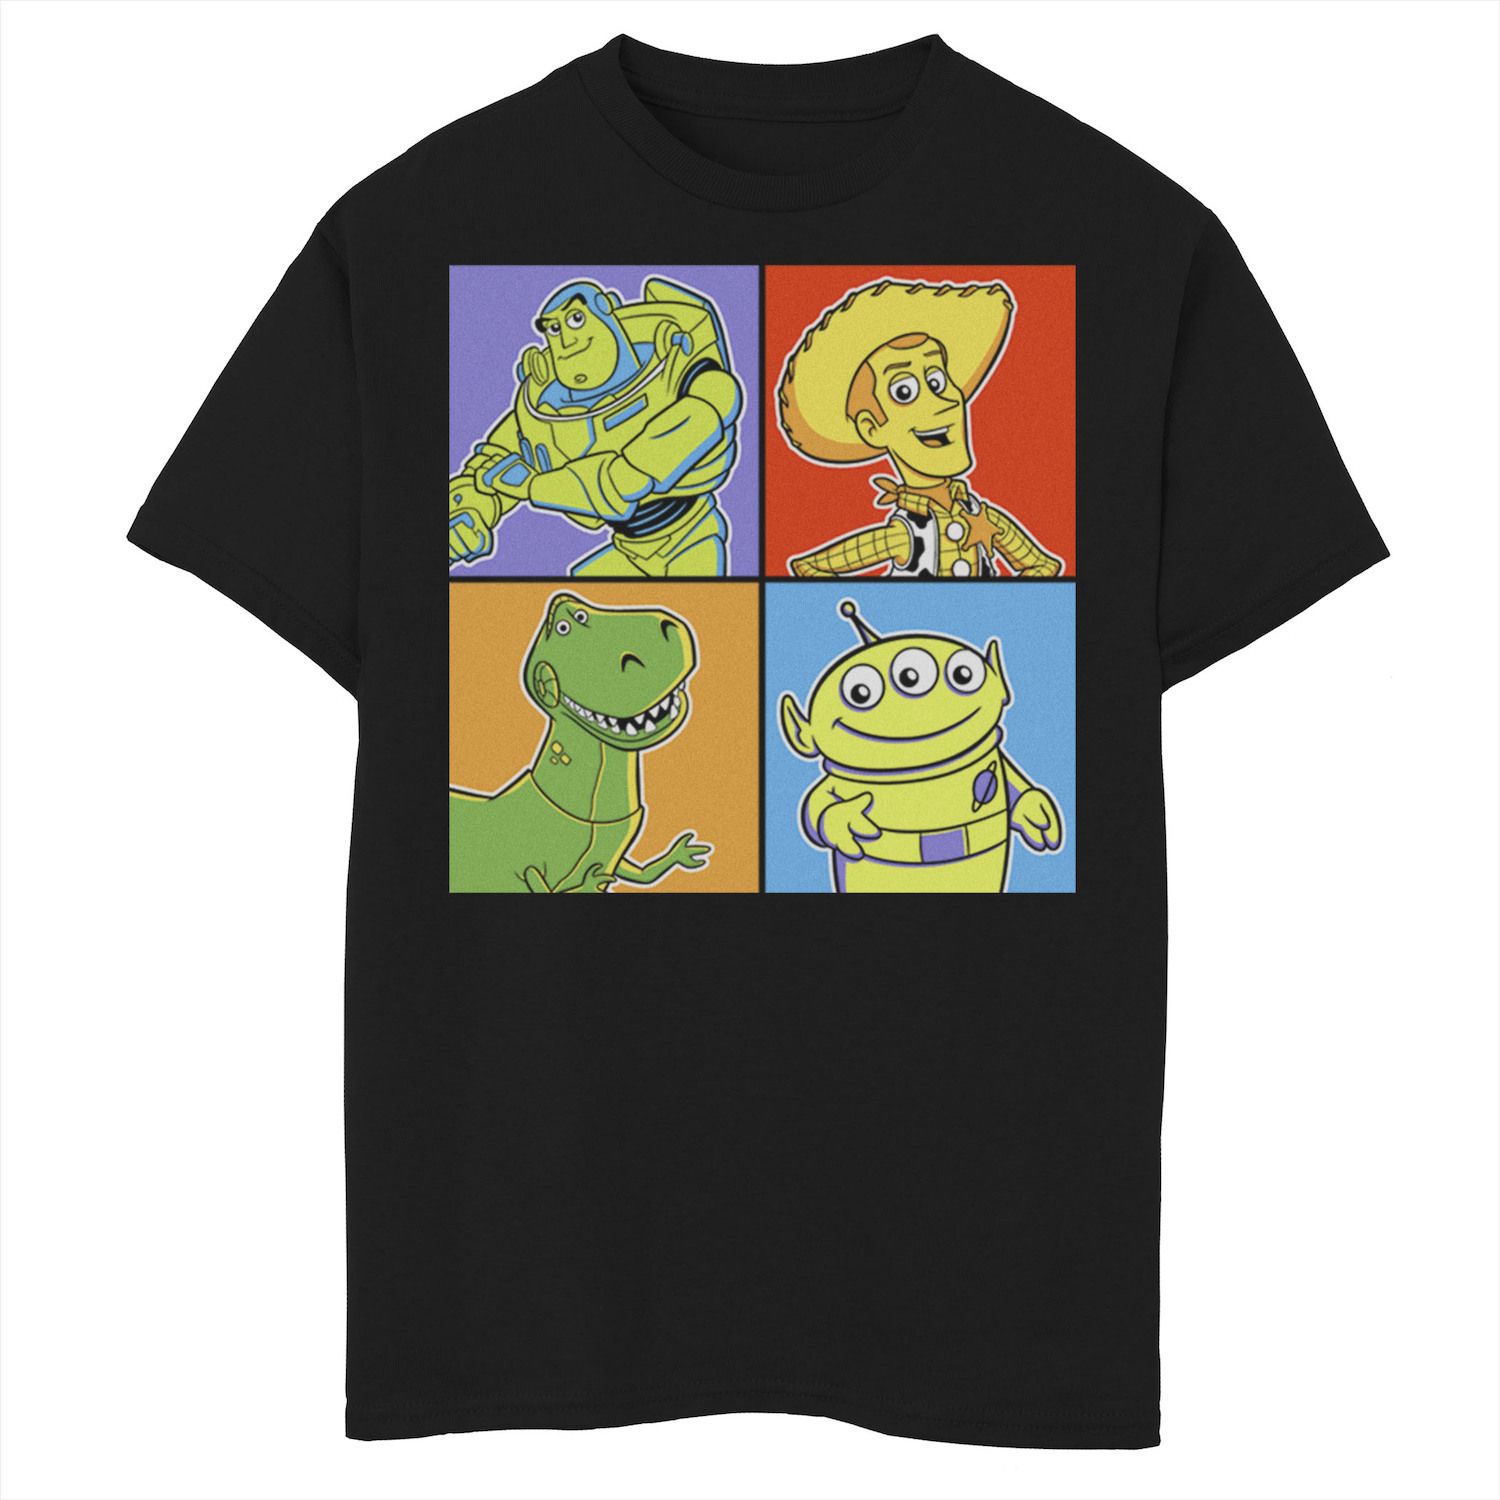 Image for Disney / Pixar 's Toy Story Boys 8-20 Group Portrait Panels Graphic Tee at Kohl's.